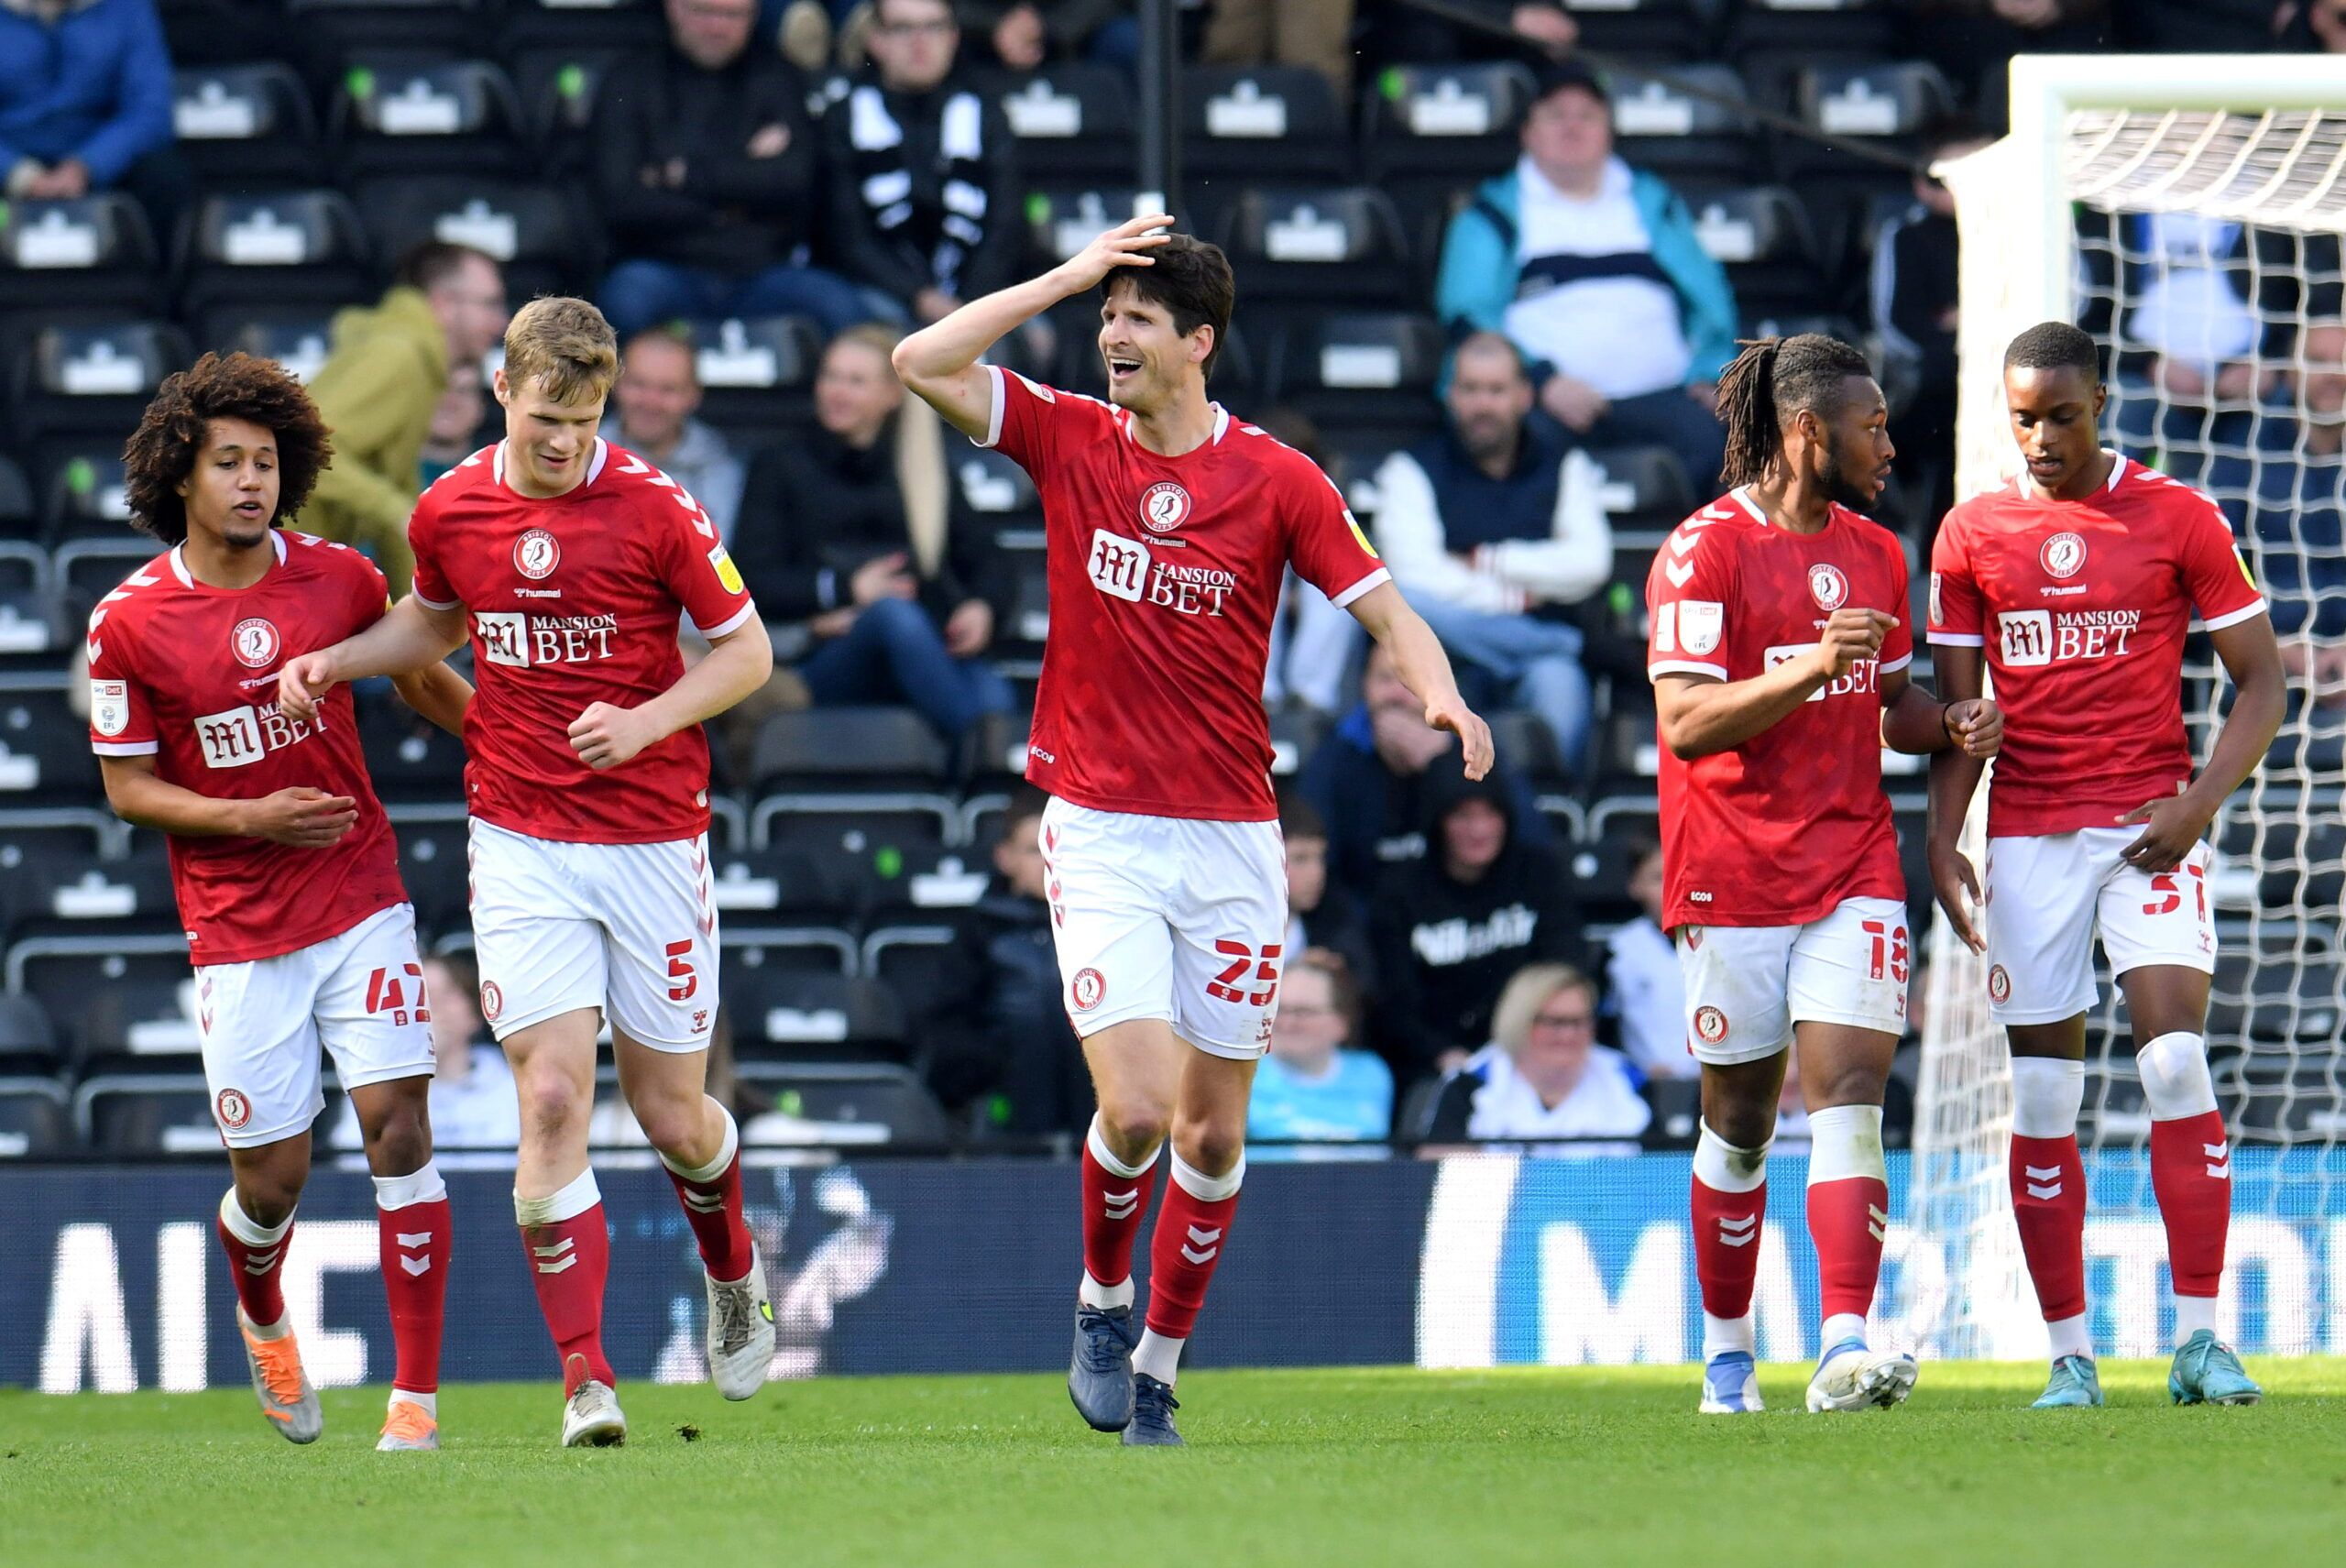 Soccer Football - Championship - Derby County v Bristol City - Pride Park, Derby, Britain - April 23, 2022 Bristol City's Timm Klose celebrates scoring their third goal  Action Images/Paul Burrows  EDITORIAL USE ONLY. No use with unauthorized audio, video, data, fixture lists, club/league logos or 